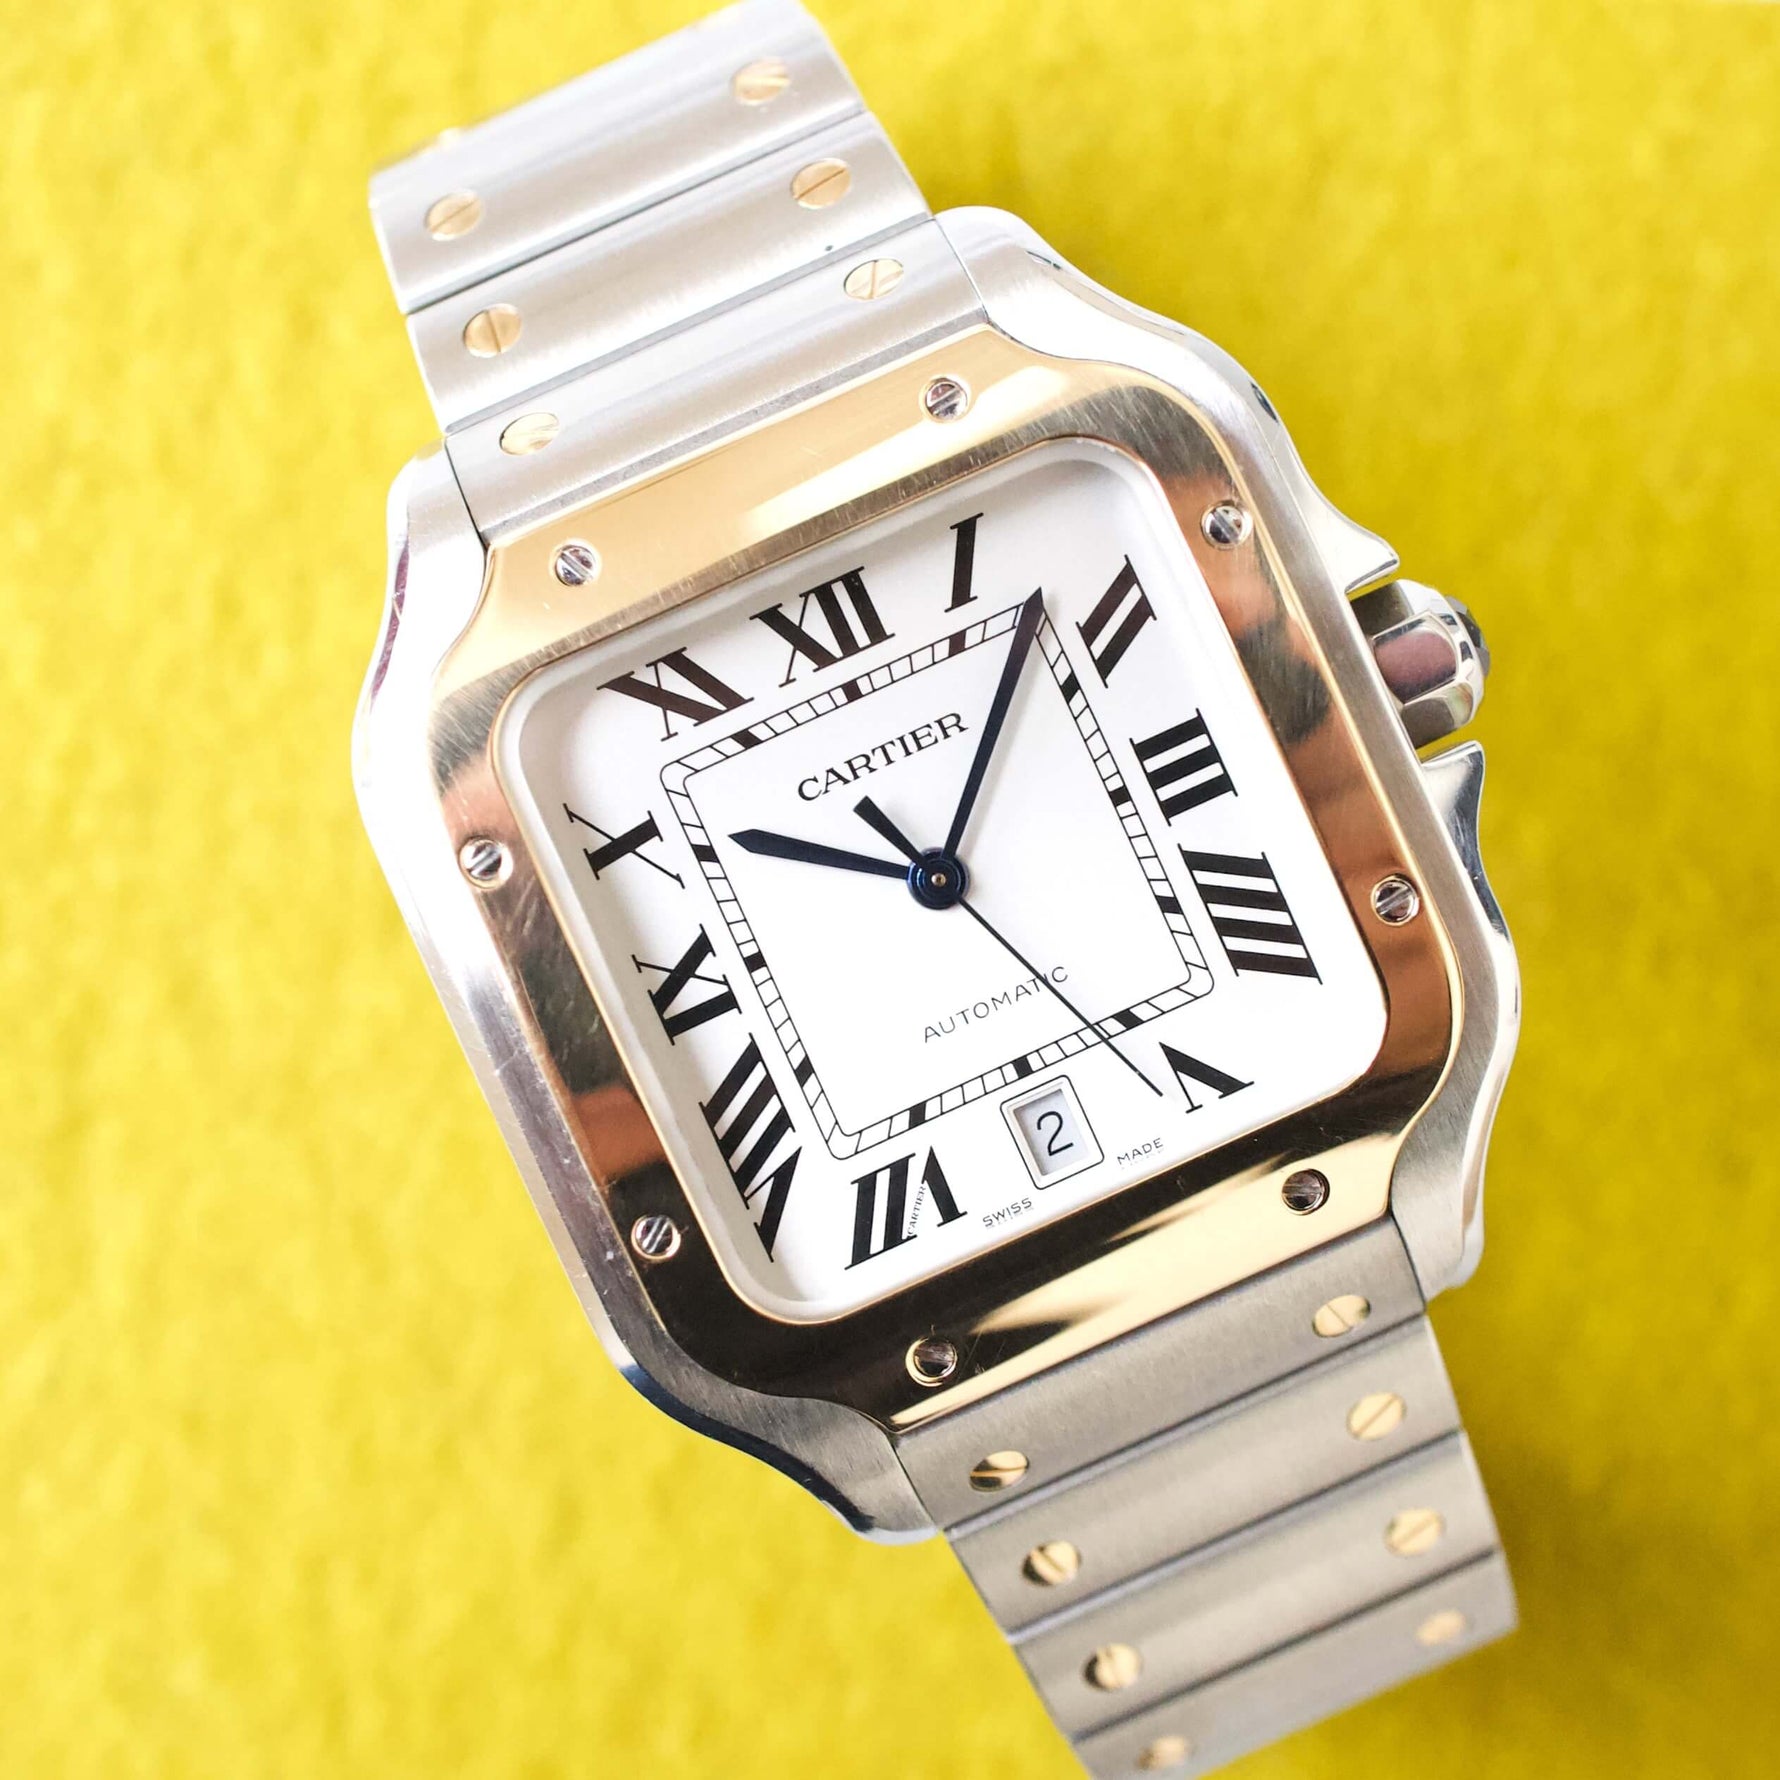 SOLDOUT: Cartier Santos W2SA0006 QuickLink System18K Gold and Steel LARGE Model (Original Retail: $11,600.00) - WearingTime Luxury Watches